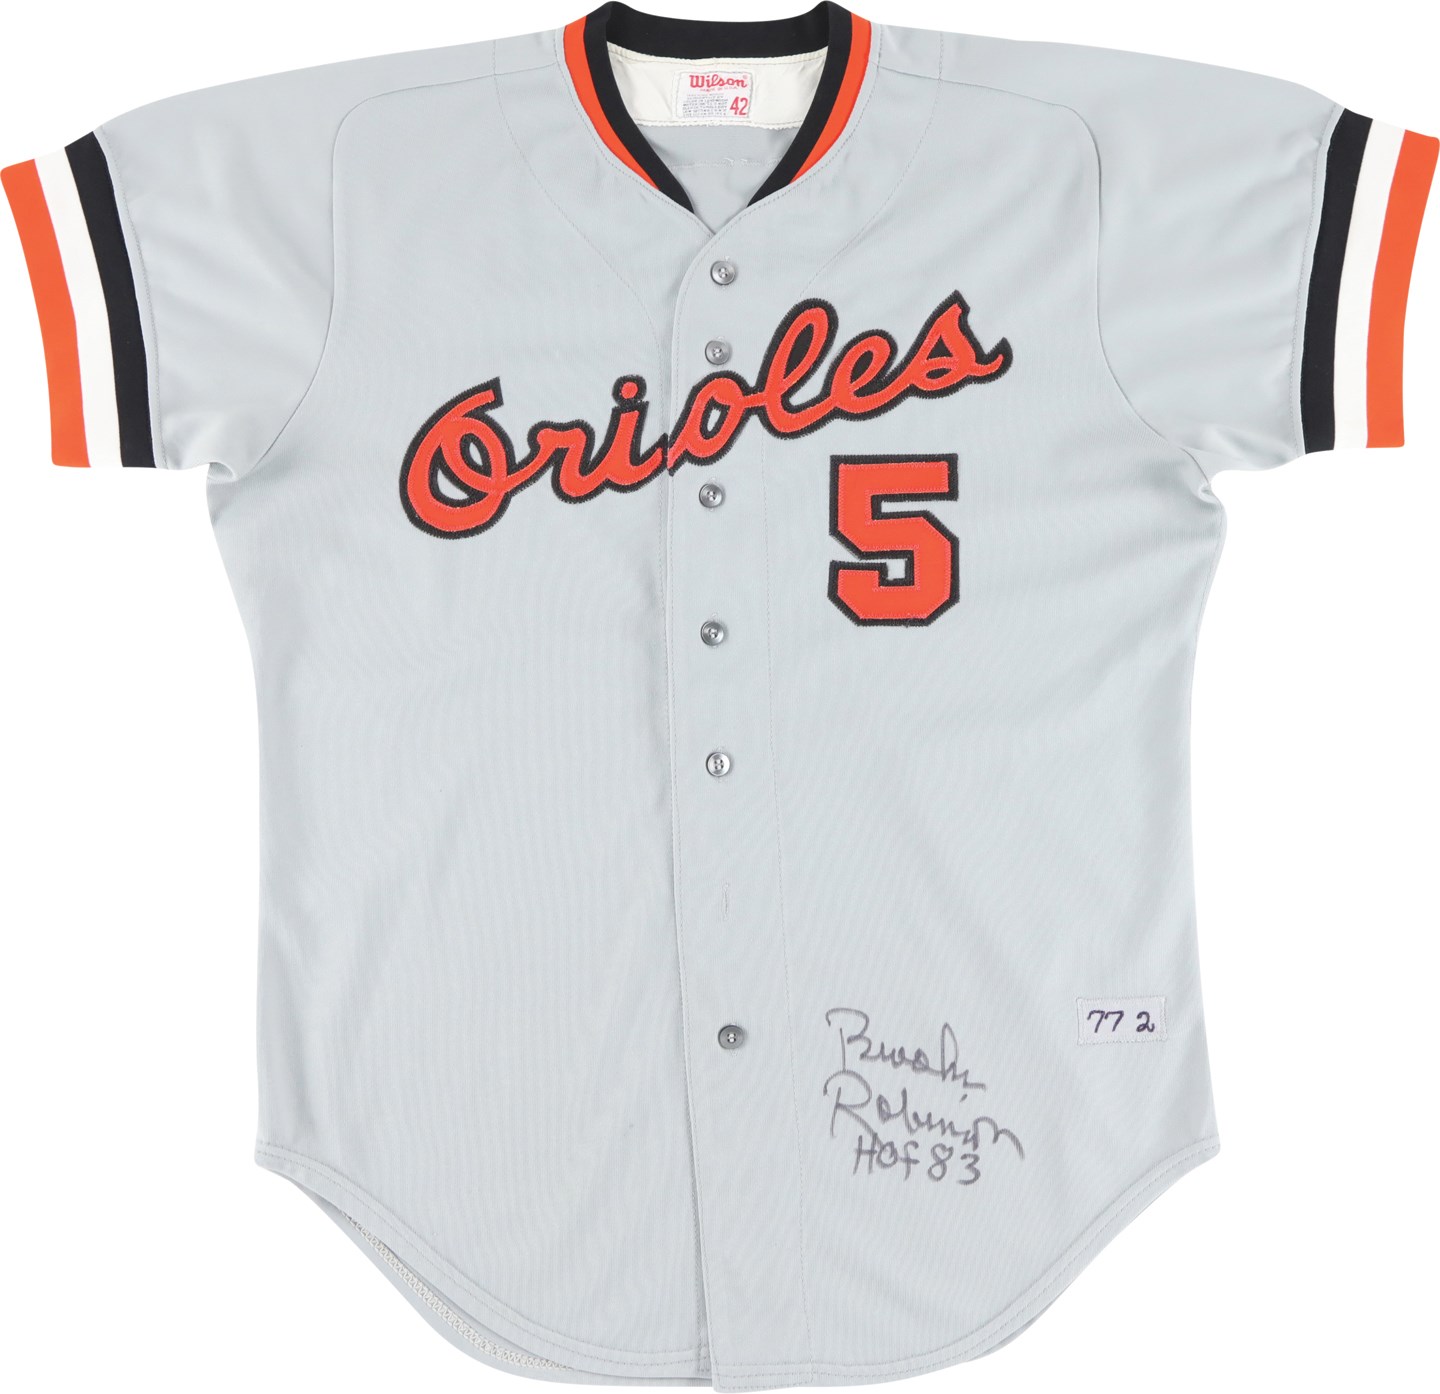 Baseball Equipment - 1977 Brooks Robinson Baltimore Orioles Signed Game Worn Jersey (MEARS A10)